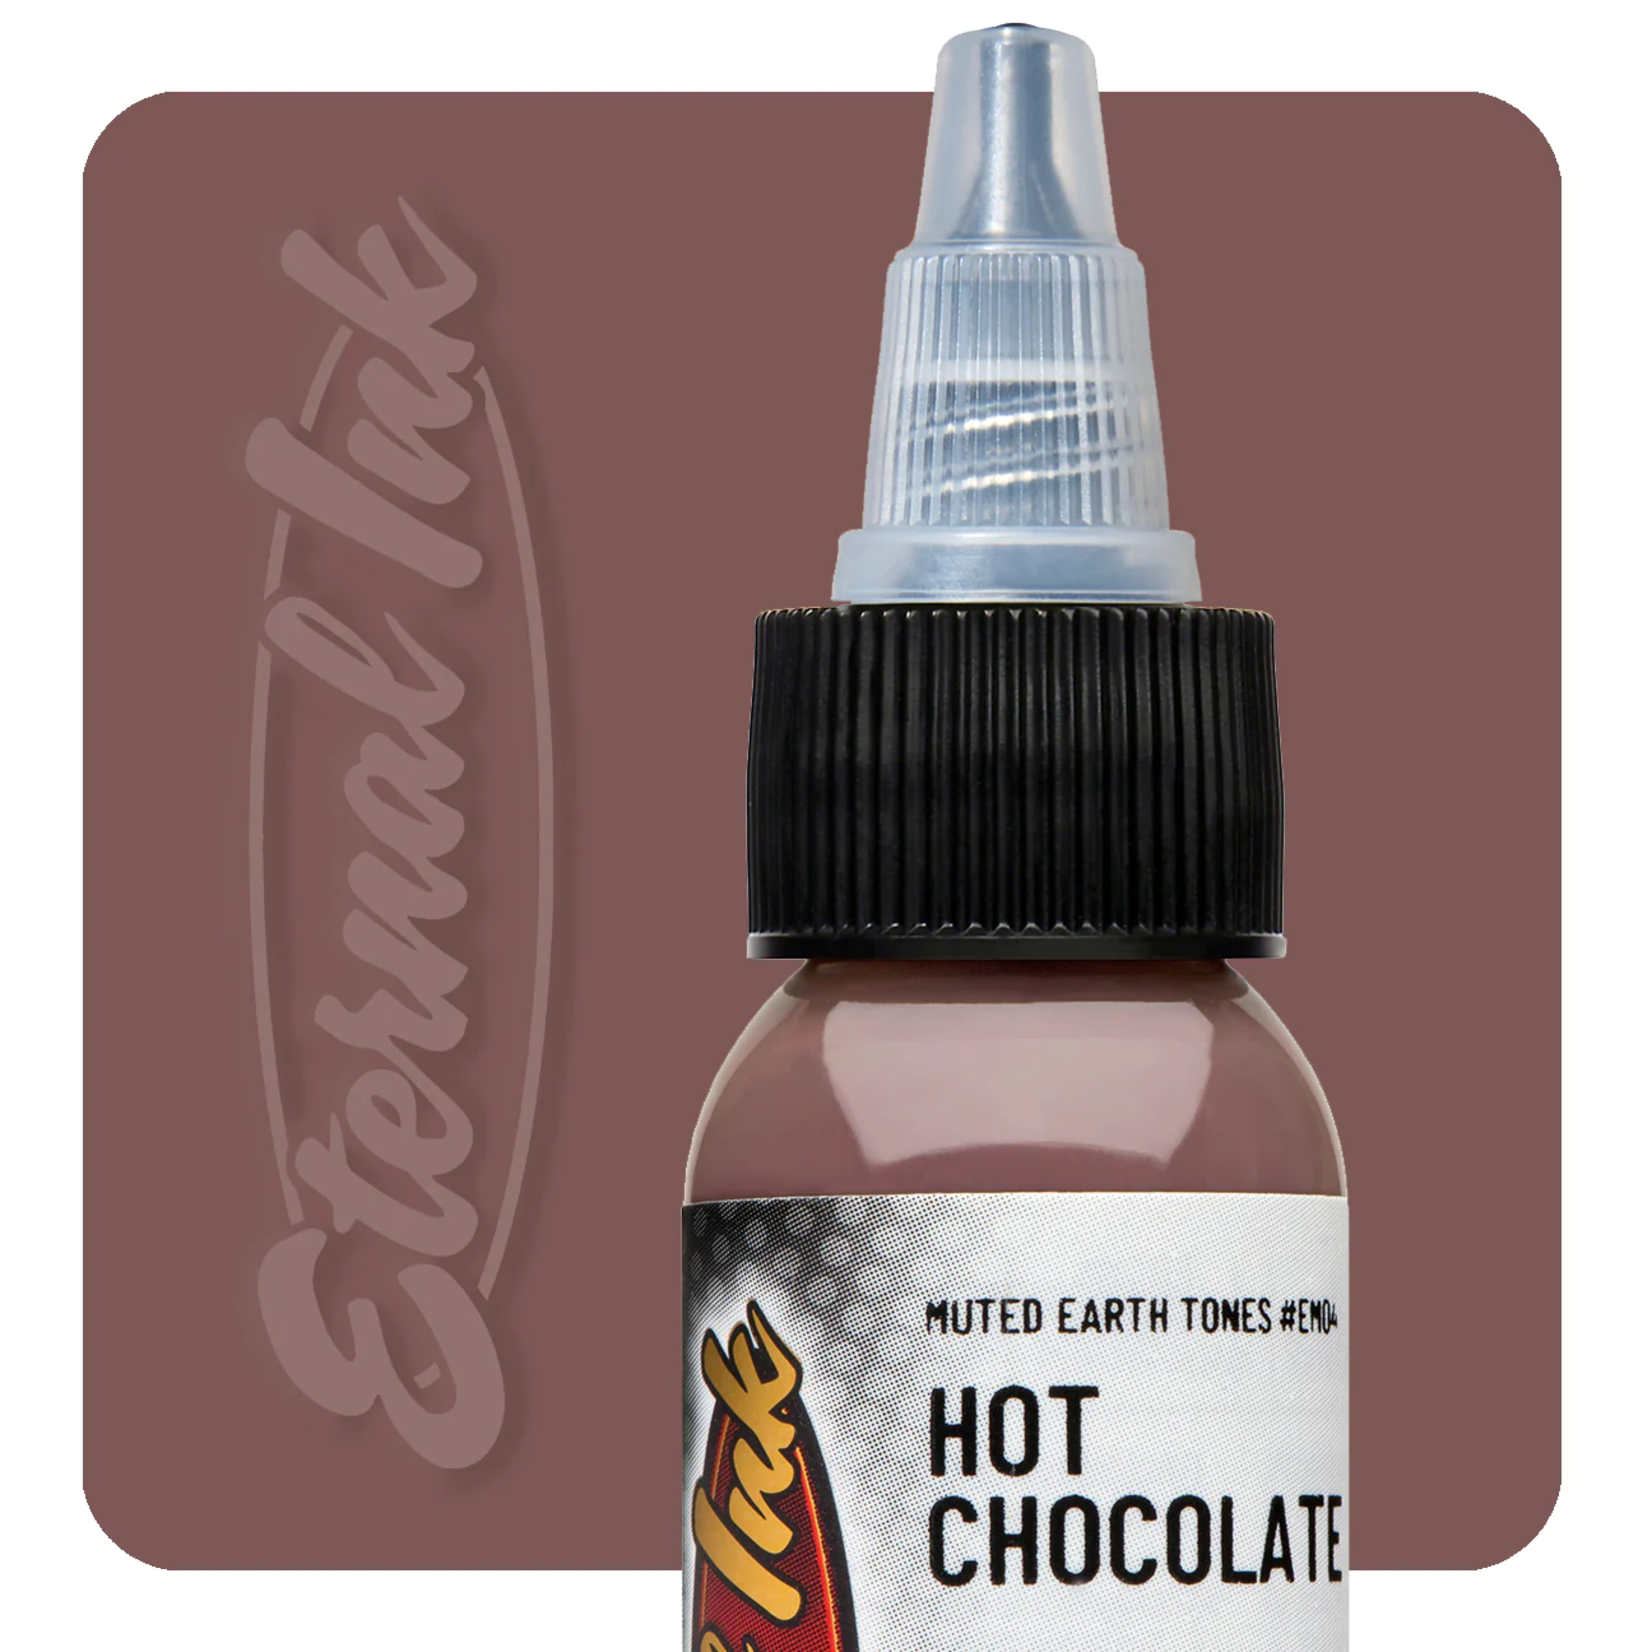 ETERNAL INK MUTED EARTH TONES HOT CHOCOLATE 1OZ